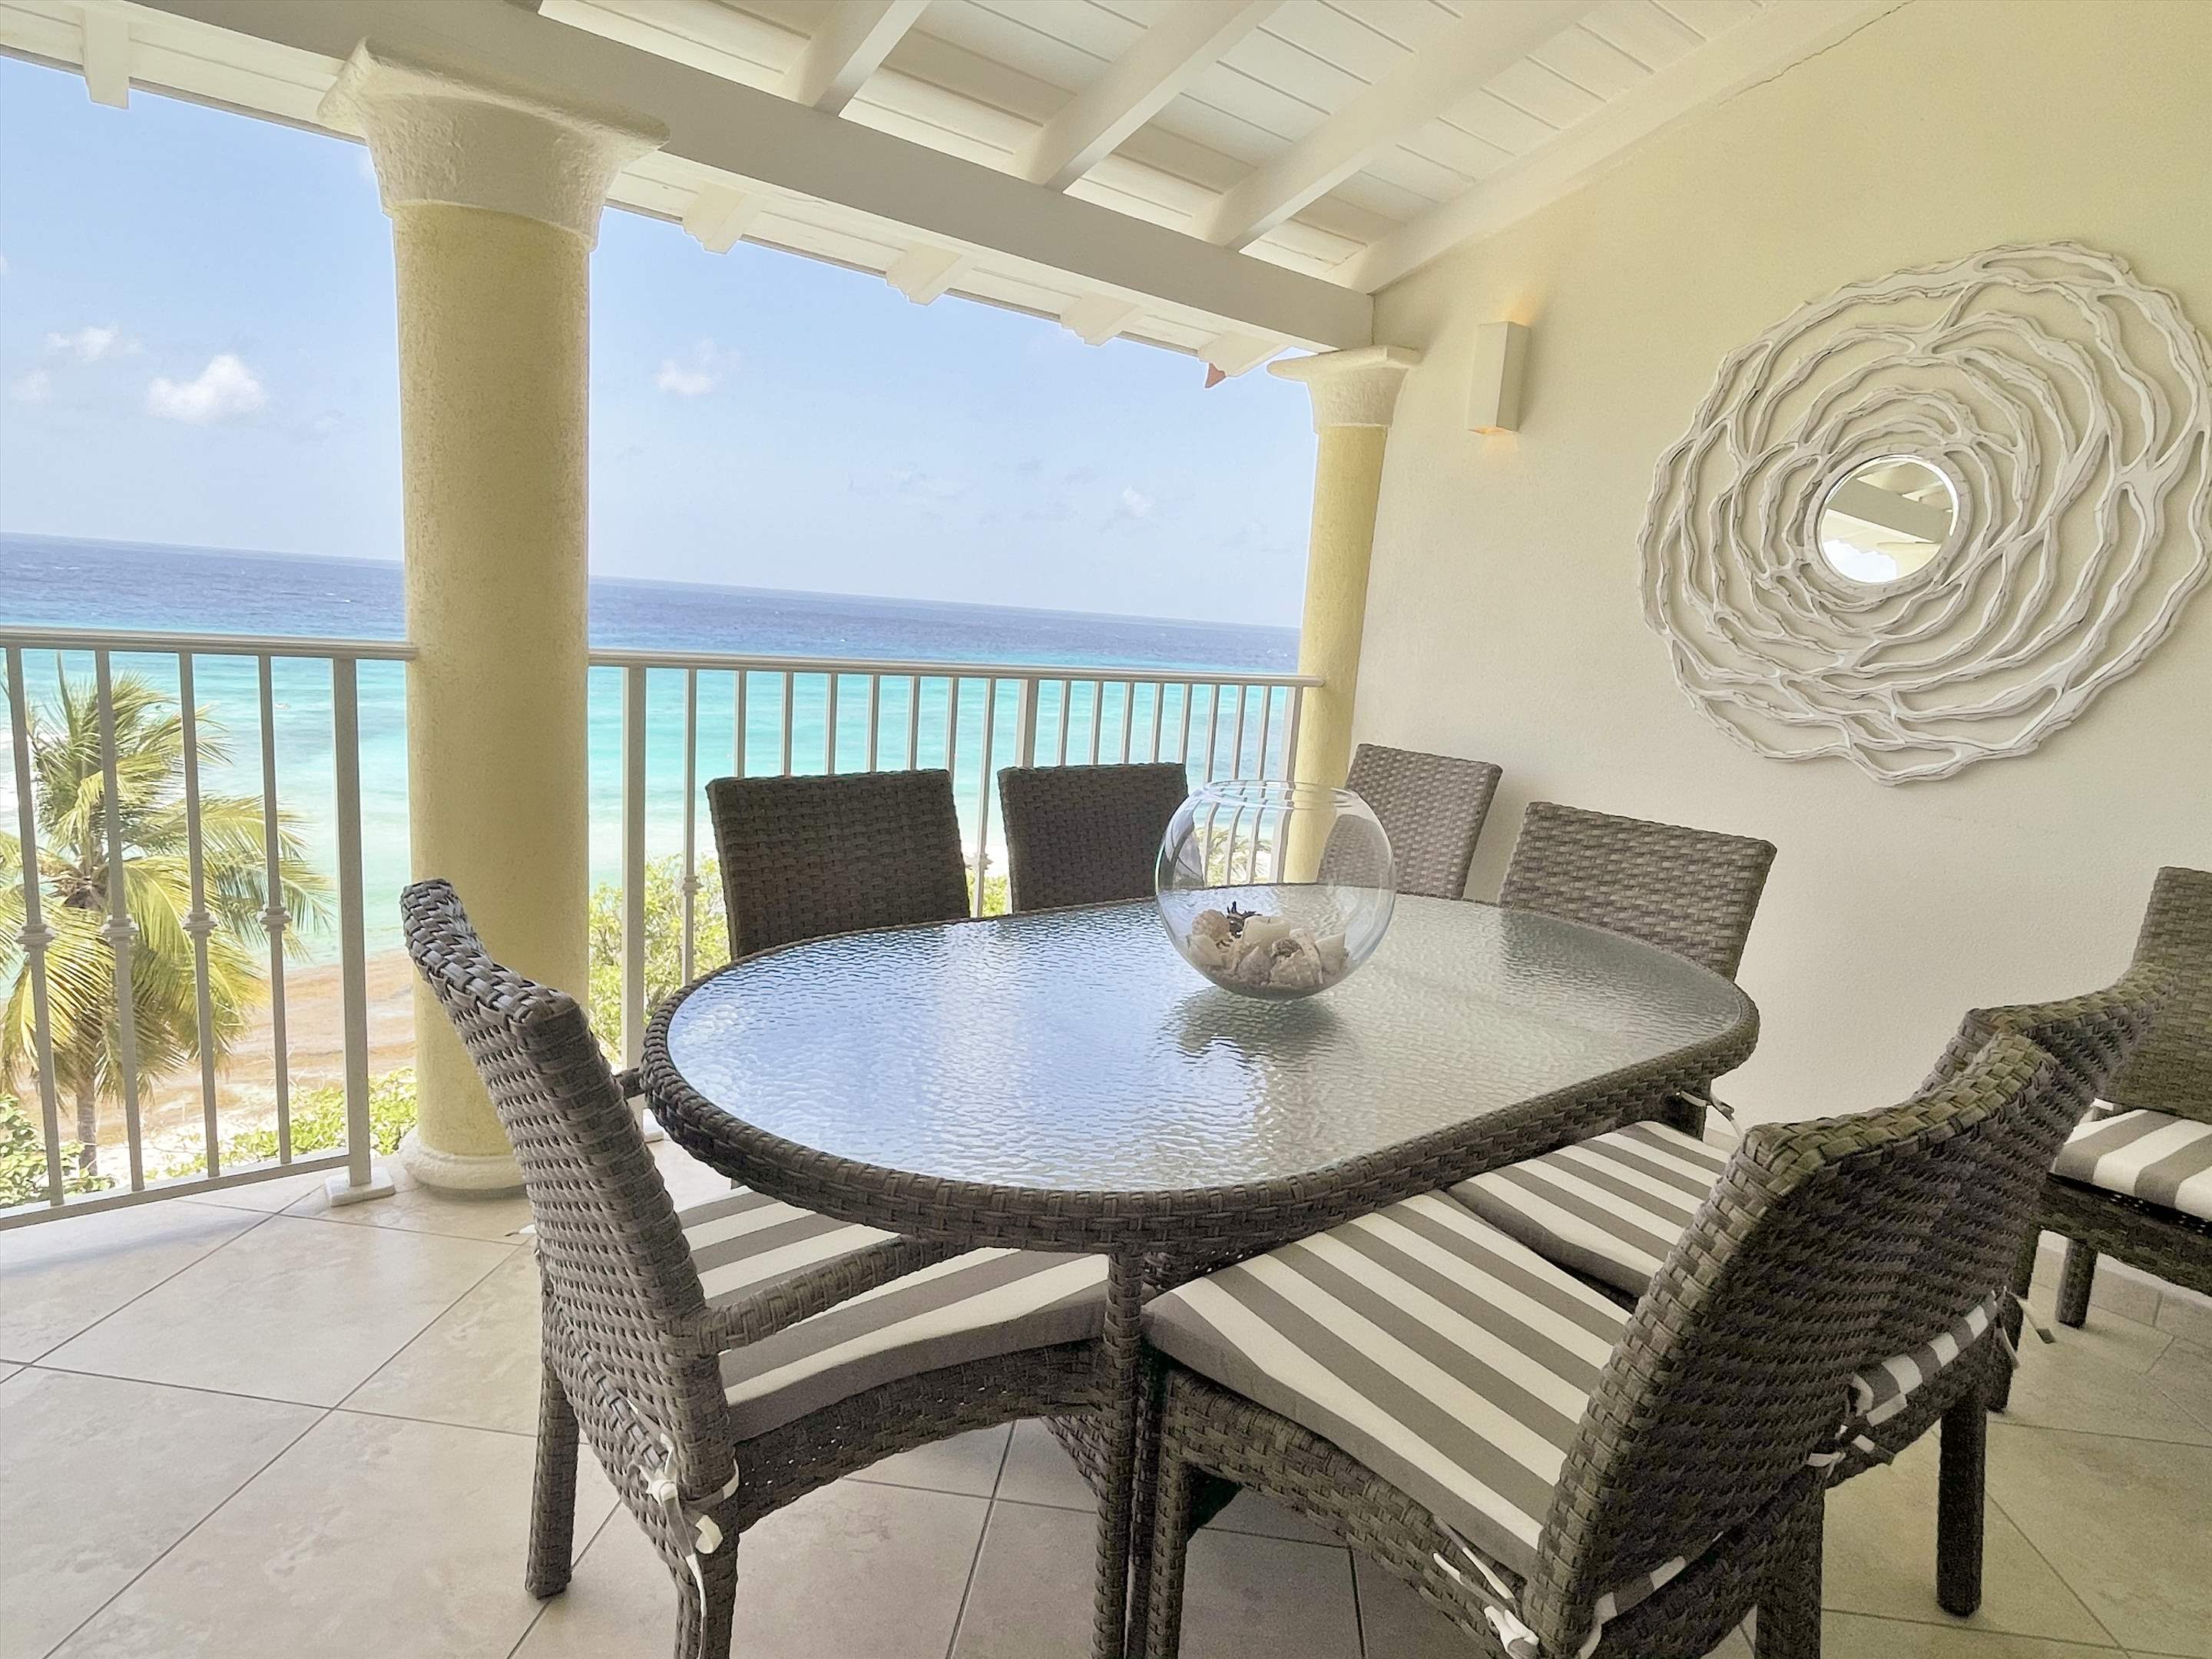 Sapphire Beach 505 , 3 Bedroom , 3 bedroom apartment in St. Lawrence Gap & South Coast, Barbados Photo #3